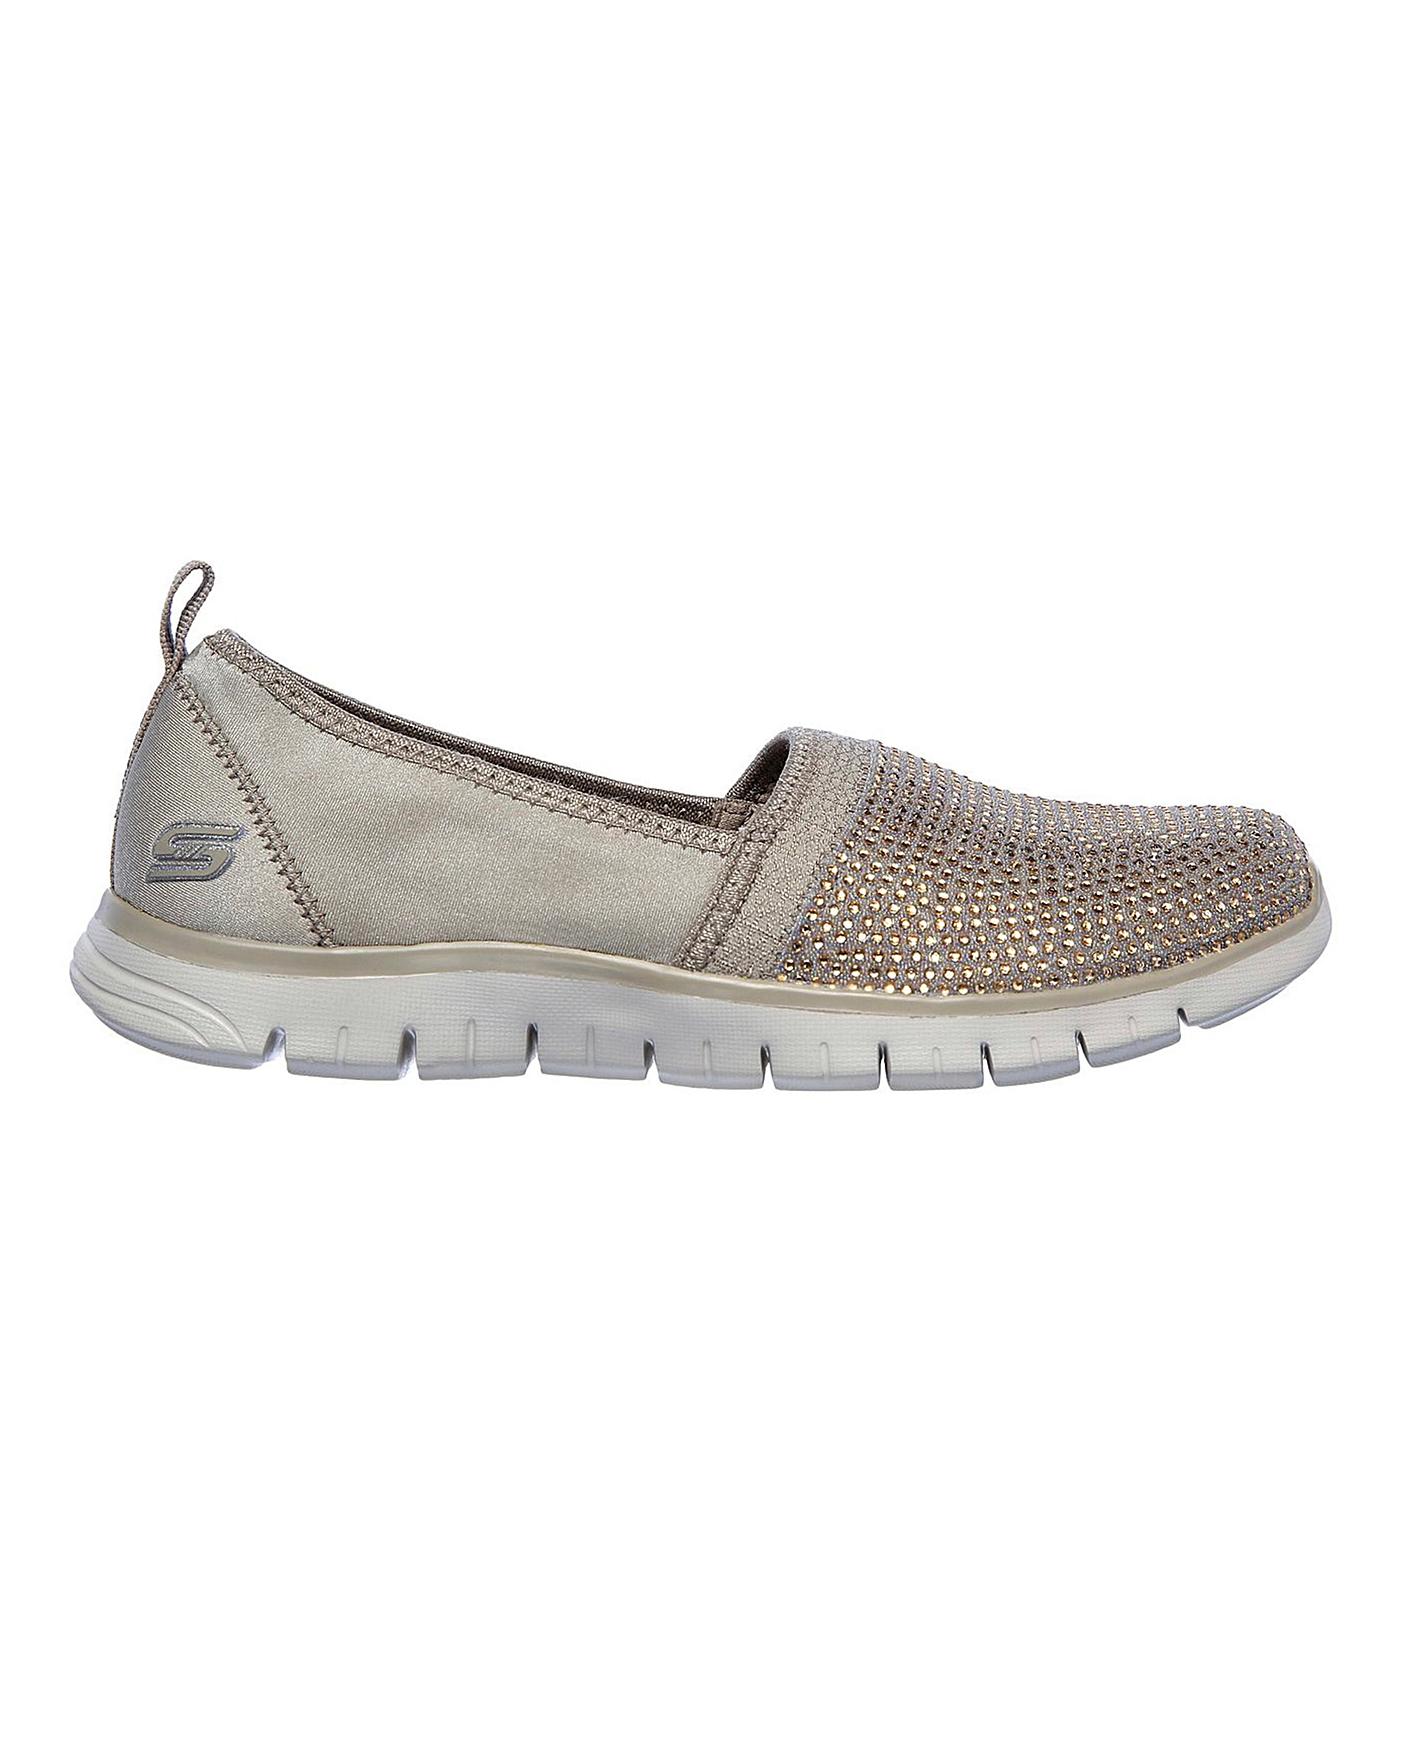 Skechers Slip on Leisure Shoes Crazy